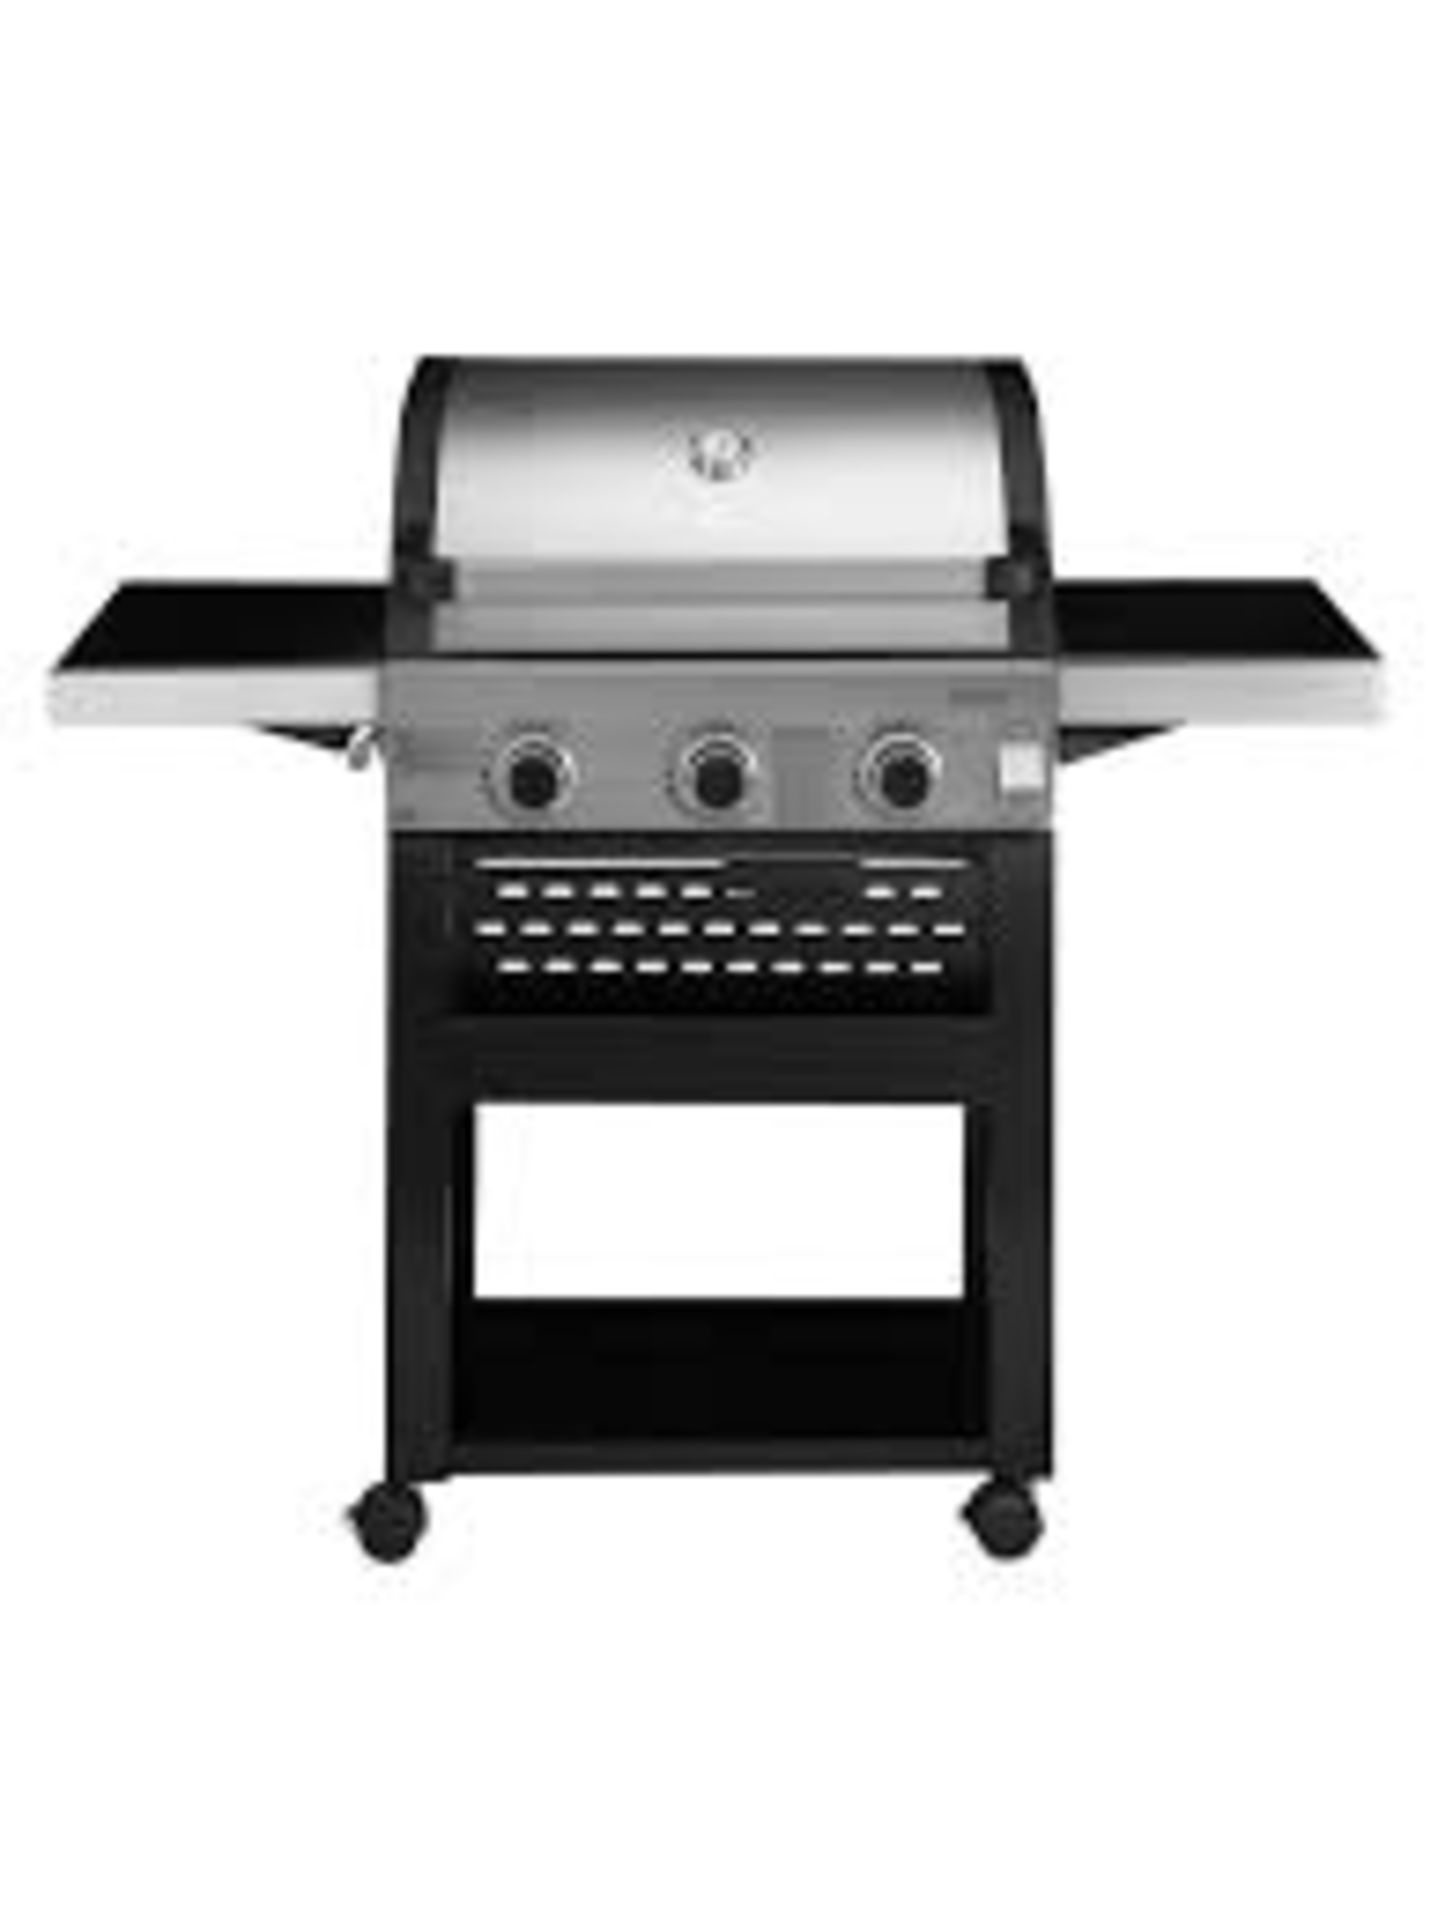 3 Burner Gas BBQ RRP £160 (Viewing or Appraisals Highly Recommended) - Image 2 of 2